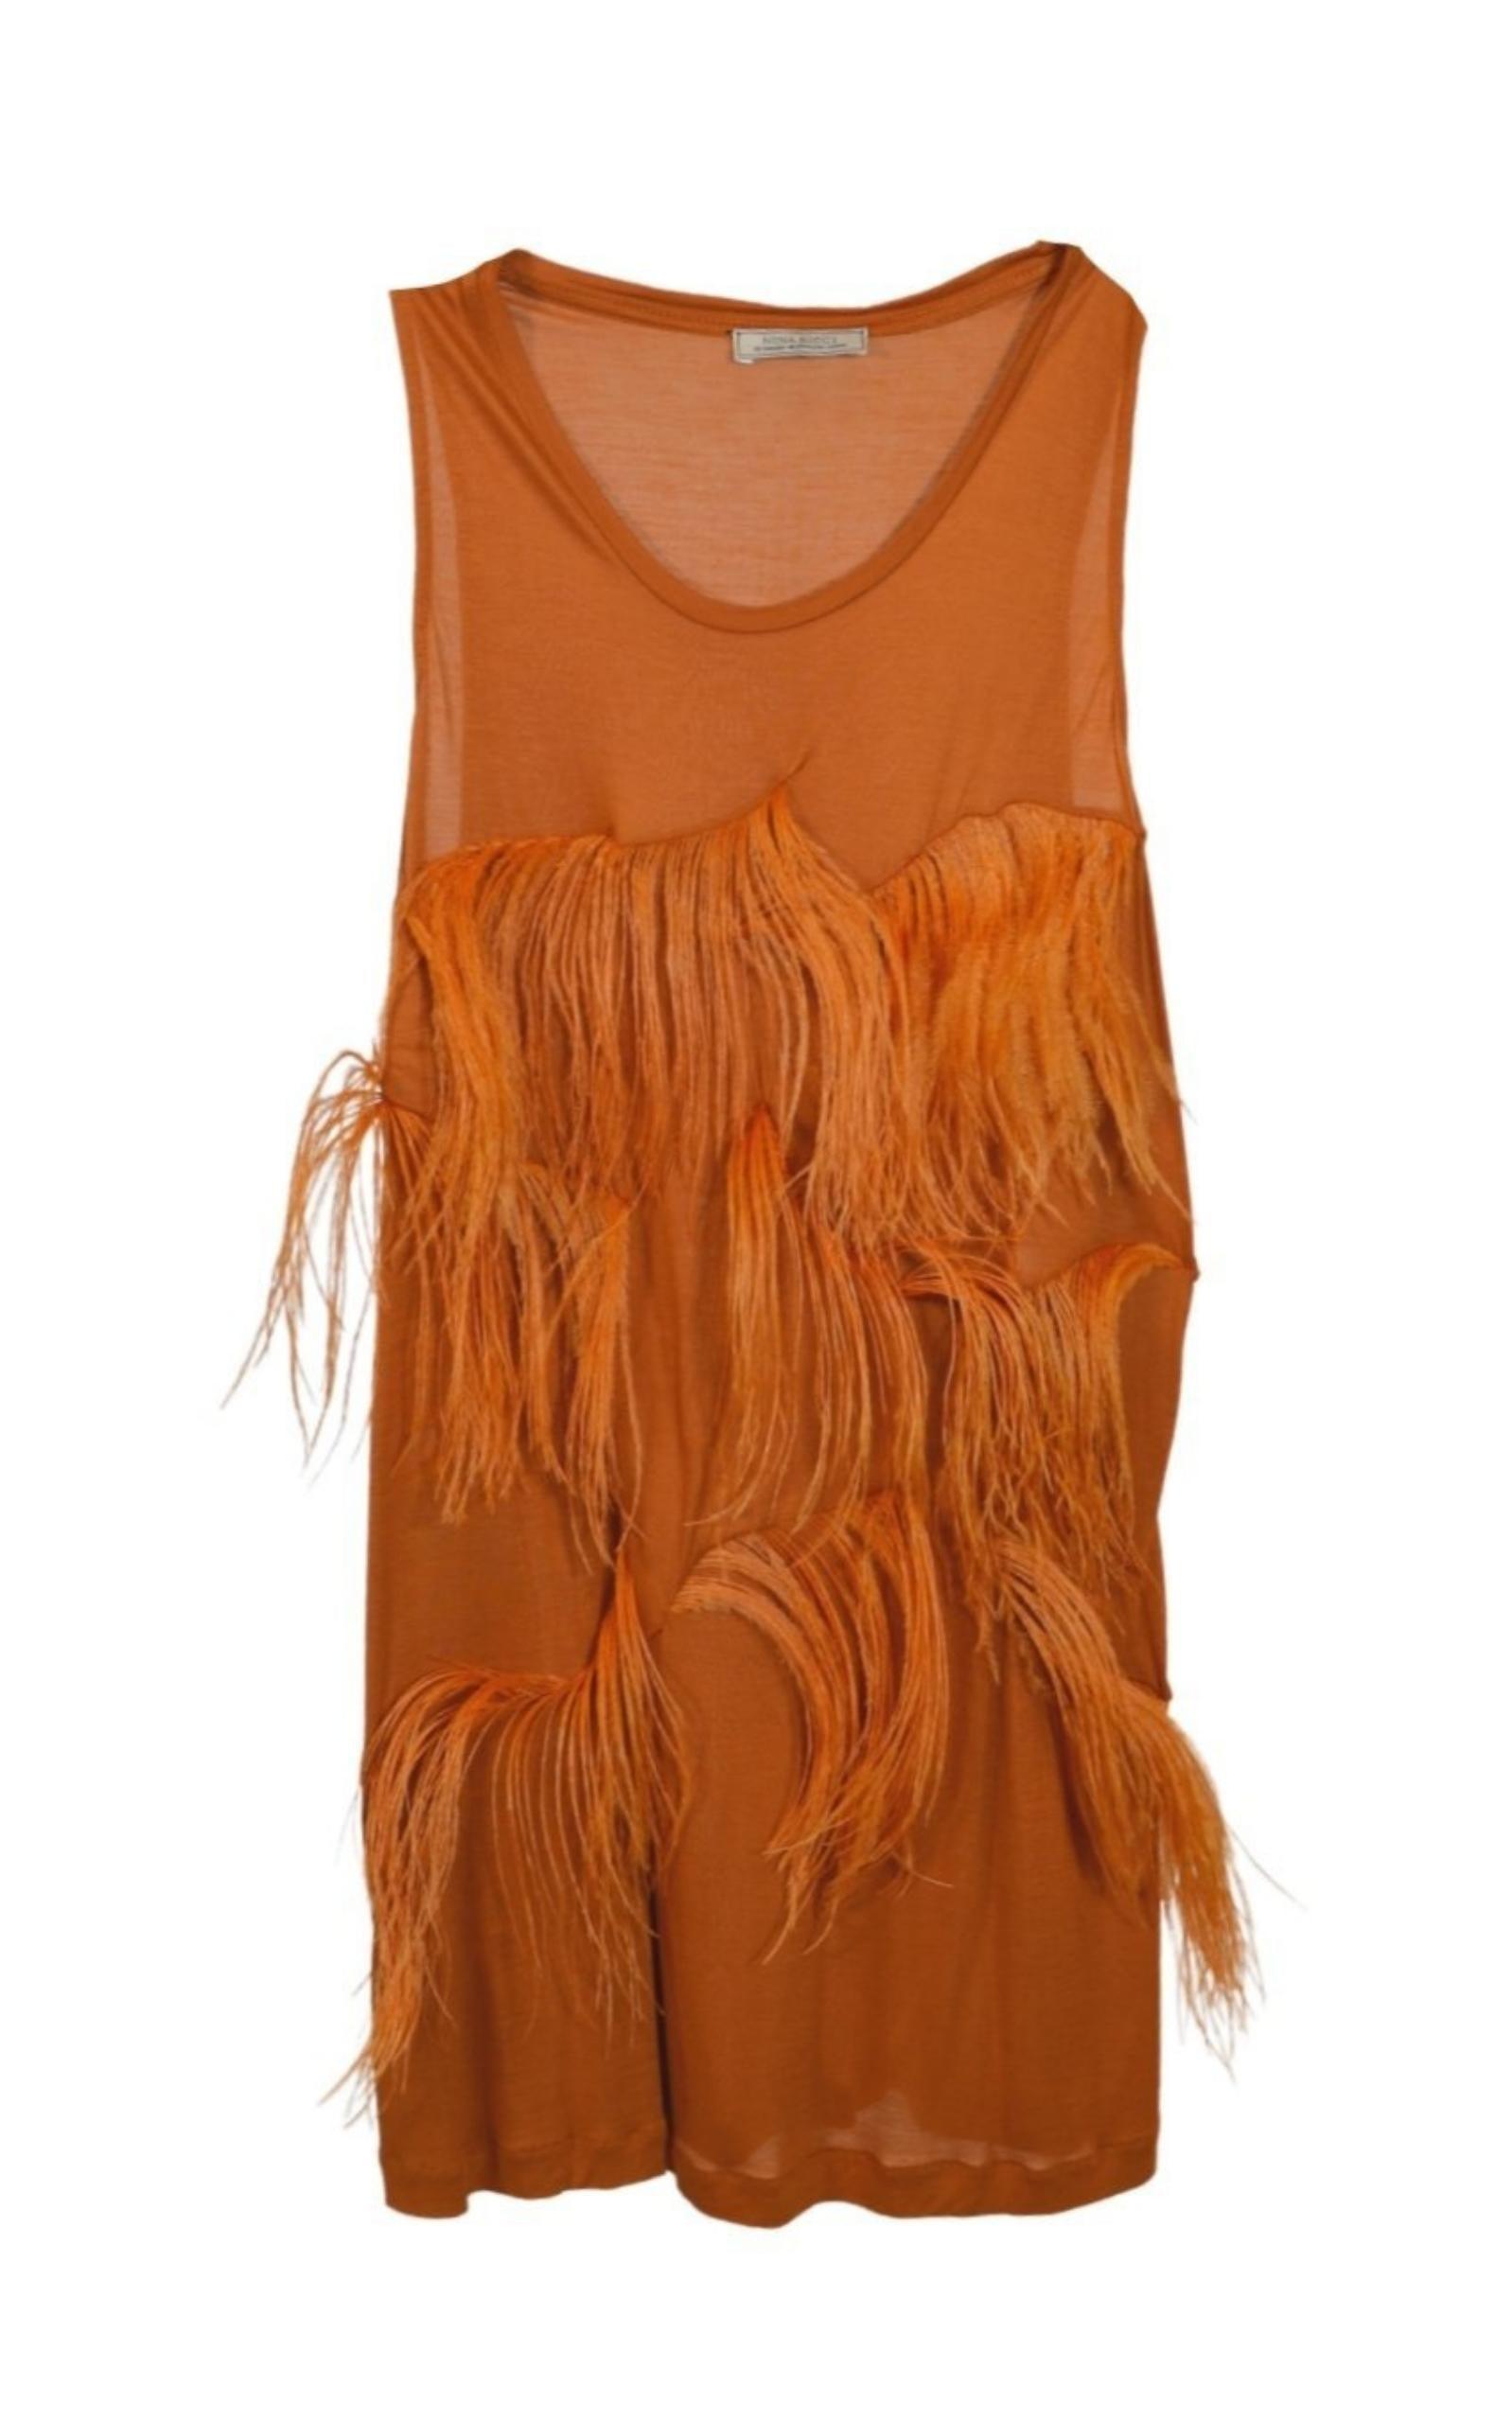 Nina Ricci Amber Feather-Embellished Stretch-jersey Top